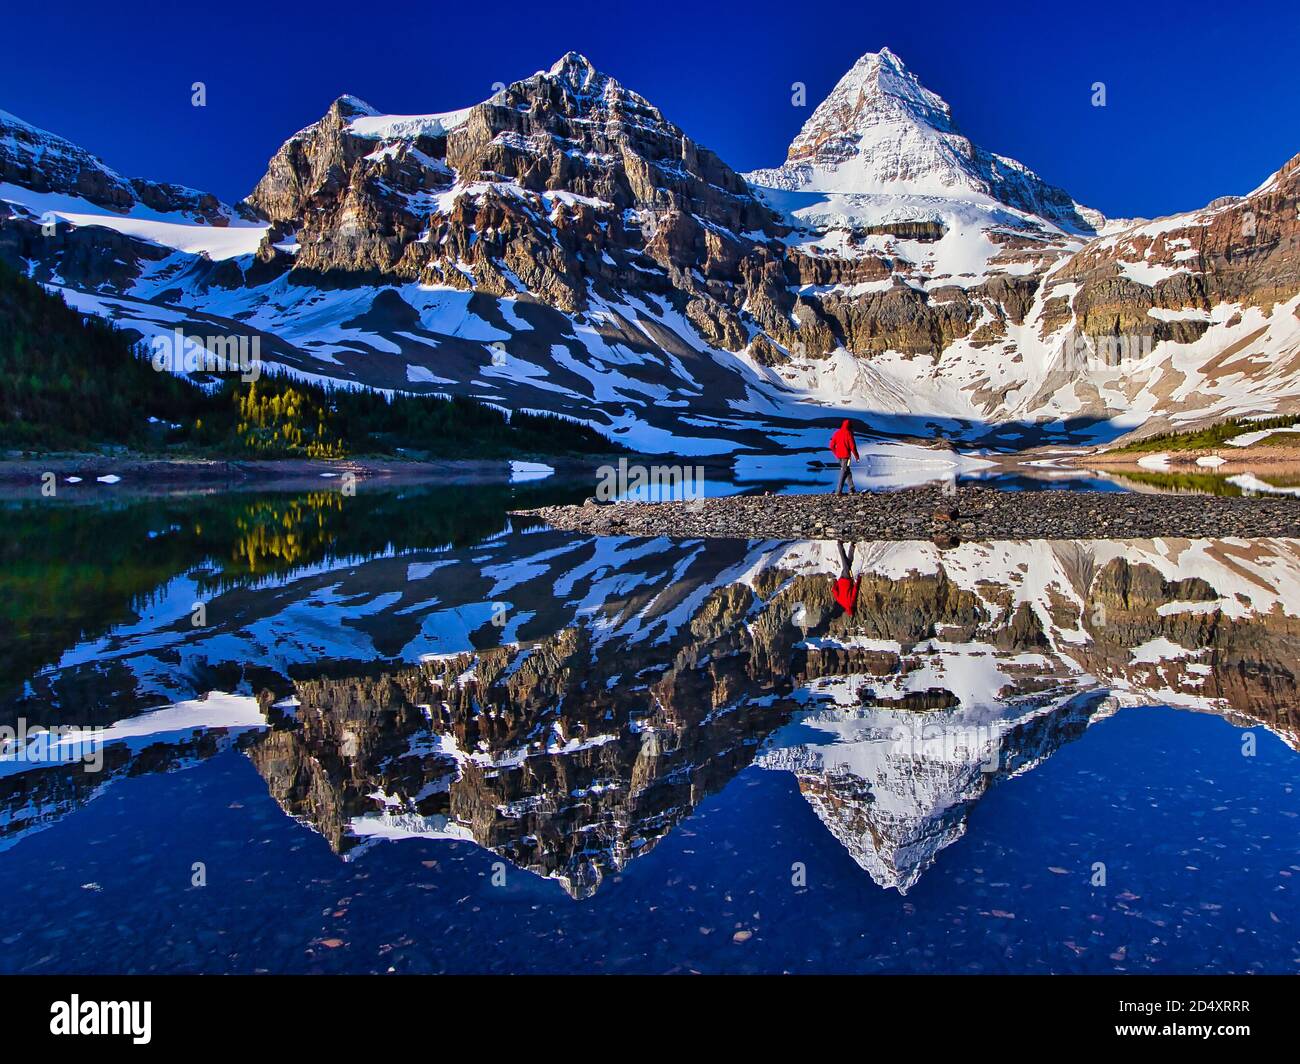 Hiker person walking along the Lake Magog with Mount Assiniboine in the background, British Columbia, Canada Stock Photo